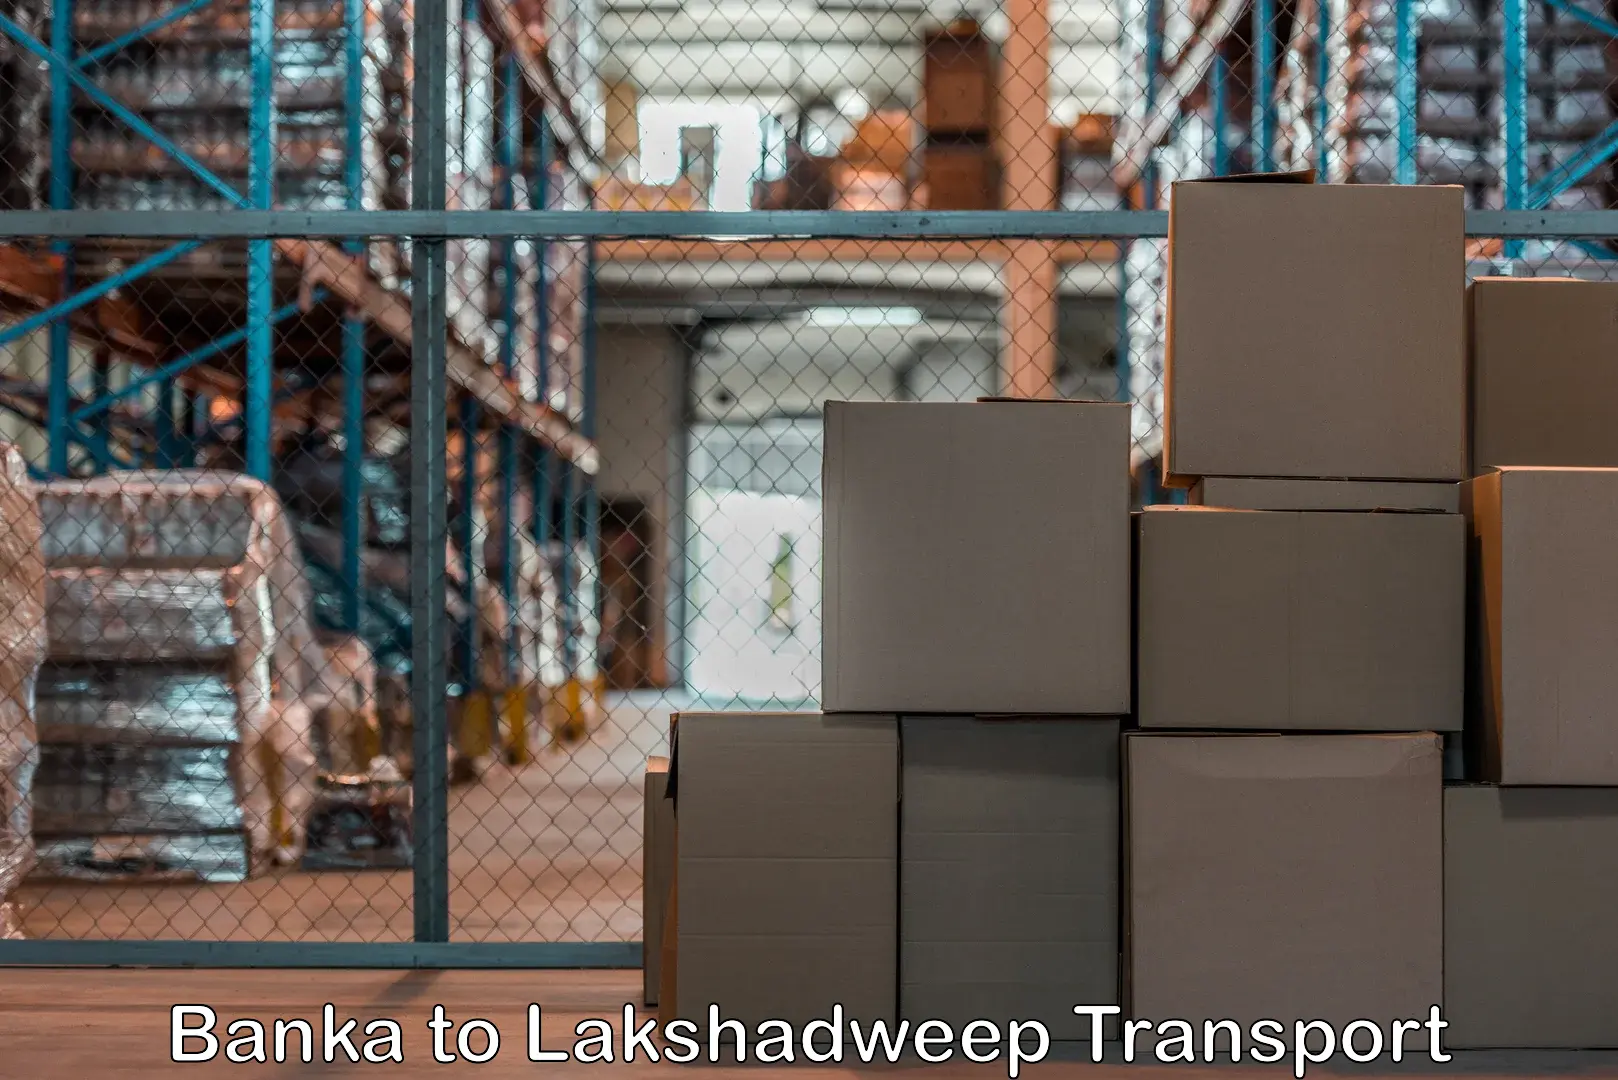 Commercial transport service Banka to Lakshadweep